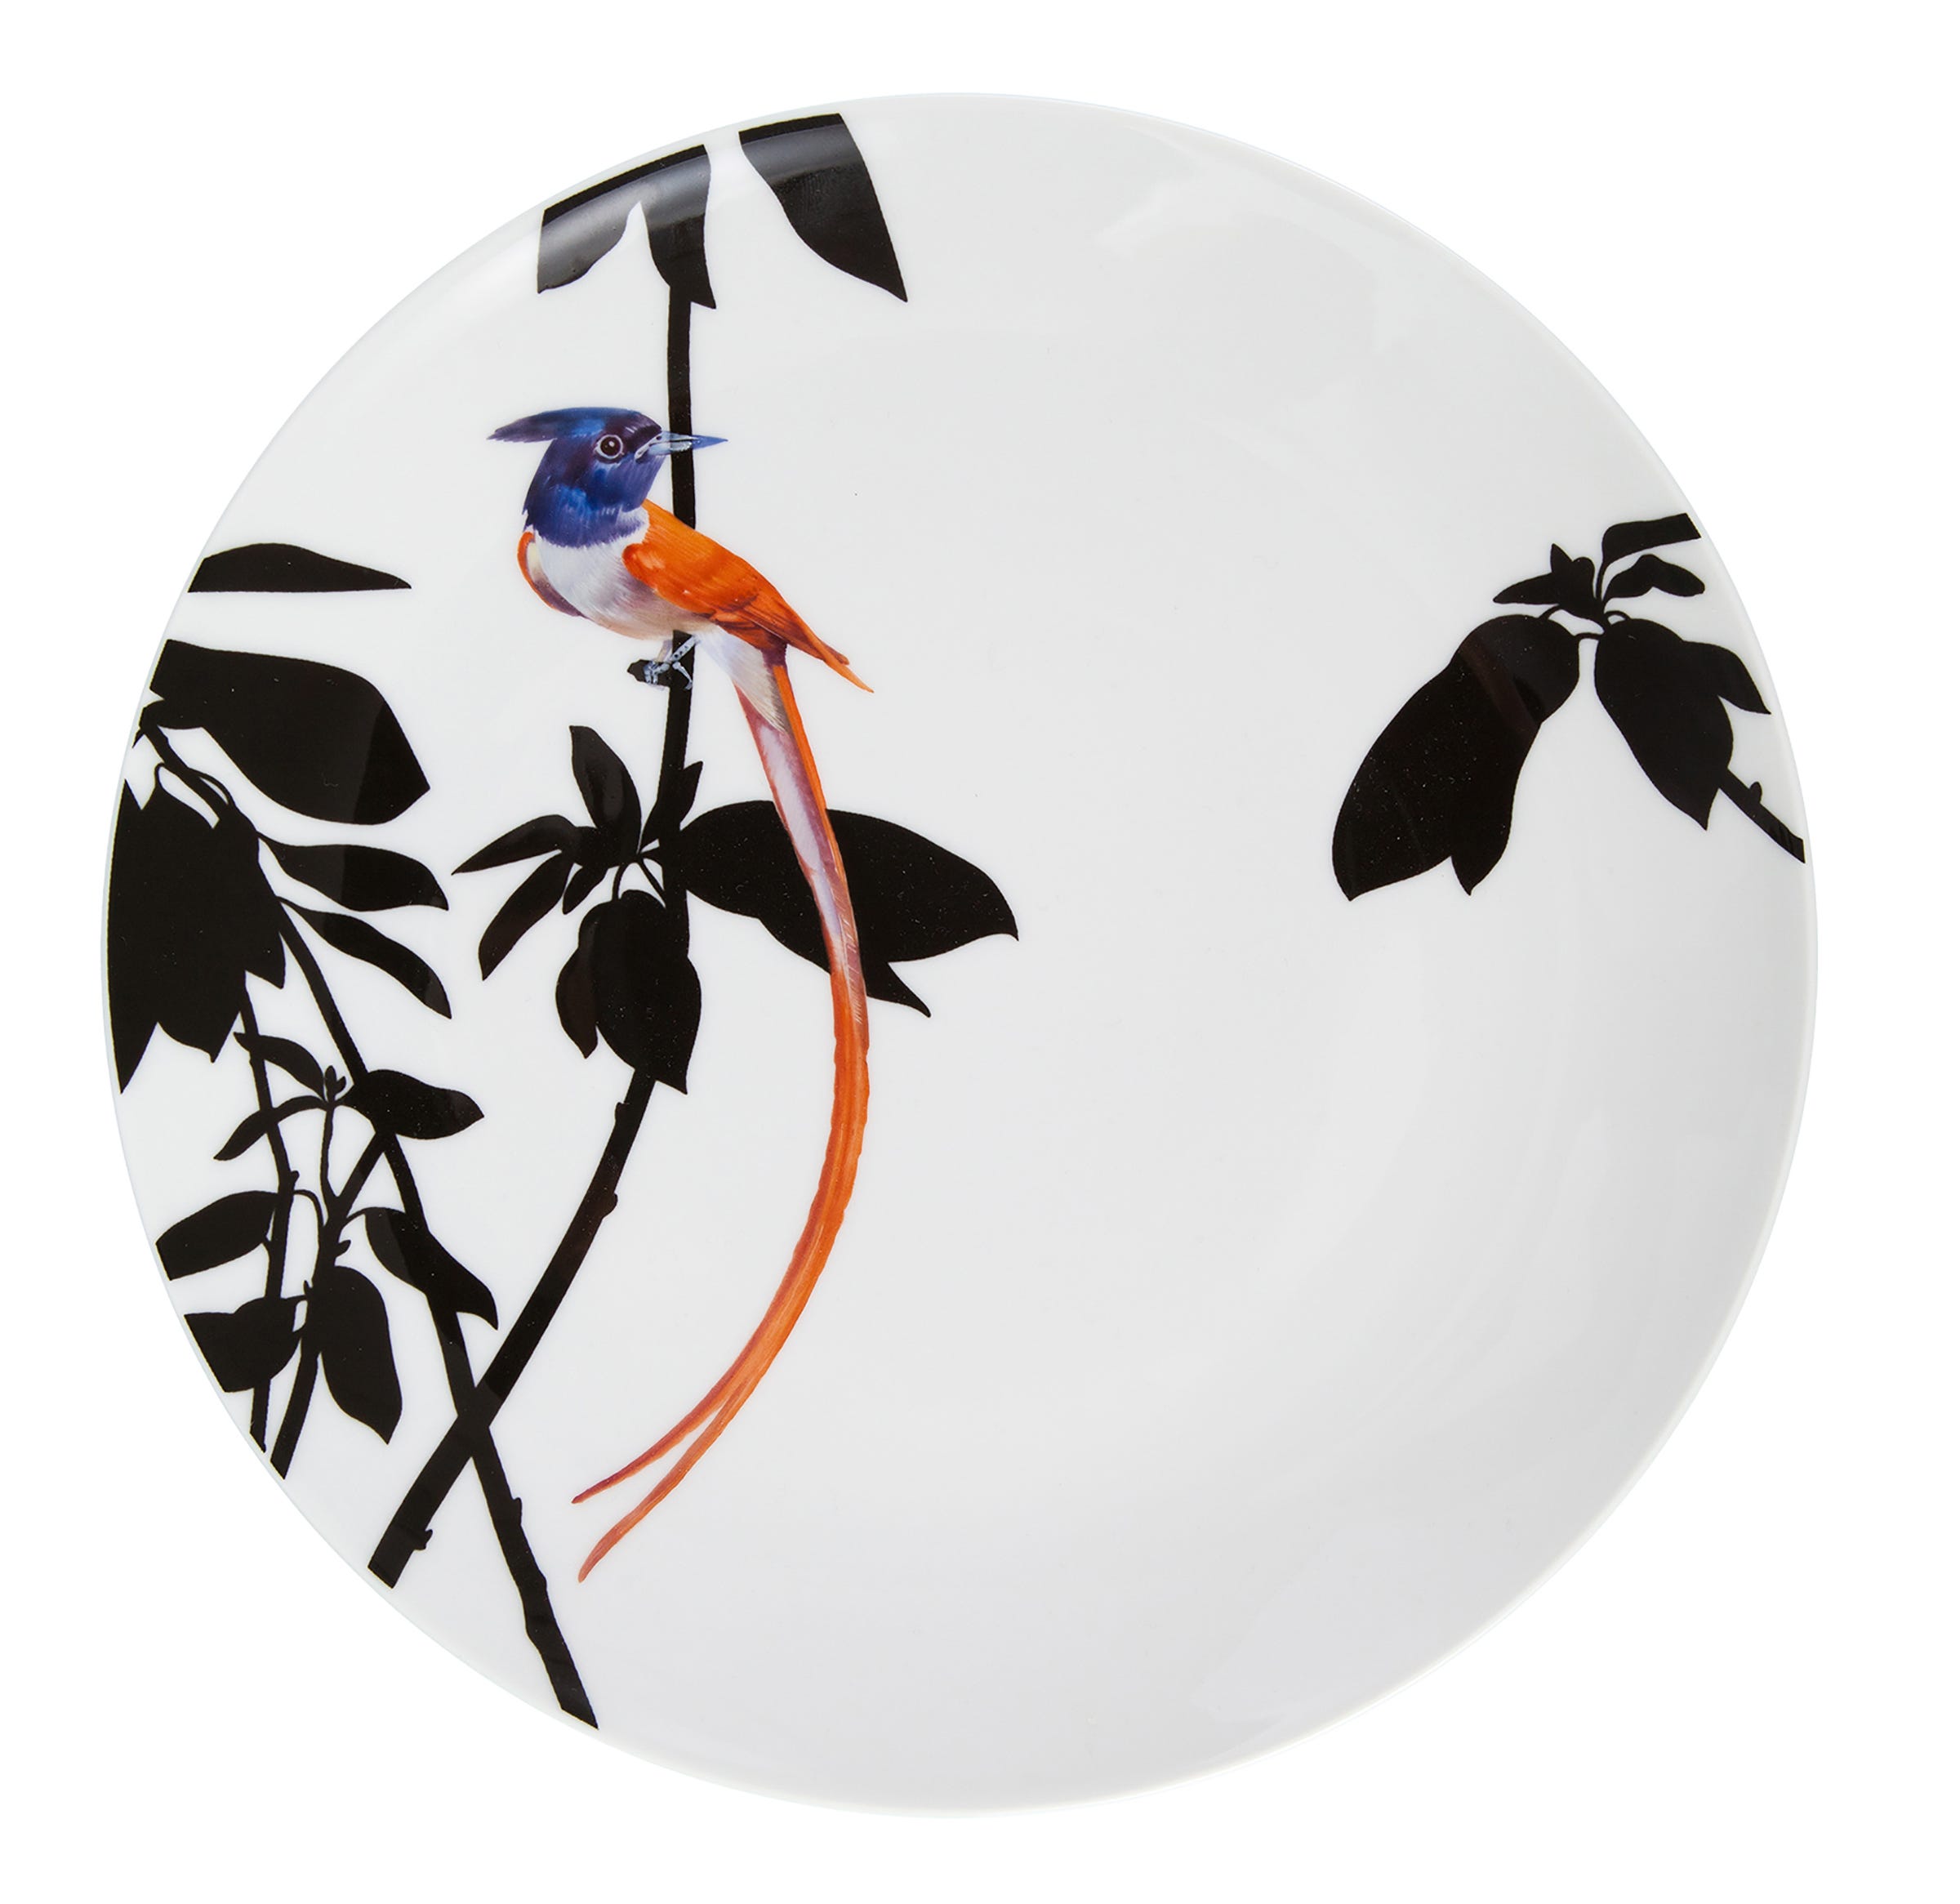 AT HOME for release January 2020 BY DESIGN Caption 10: Birds perched on flowery branches, strikingly silhouetted on a white plate resemble paper-cut pieces in Meissen's Flying Jewels pattern, introduced at Ambiente at Messe Frankfurt. The birds are hand-painted.